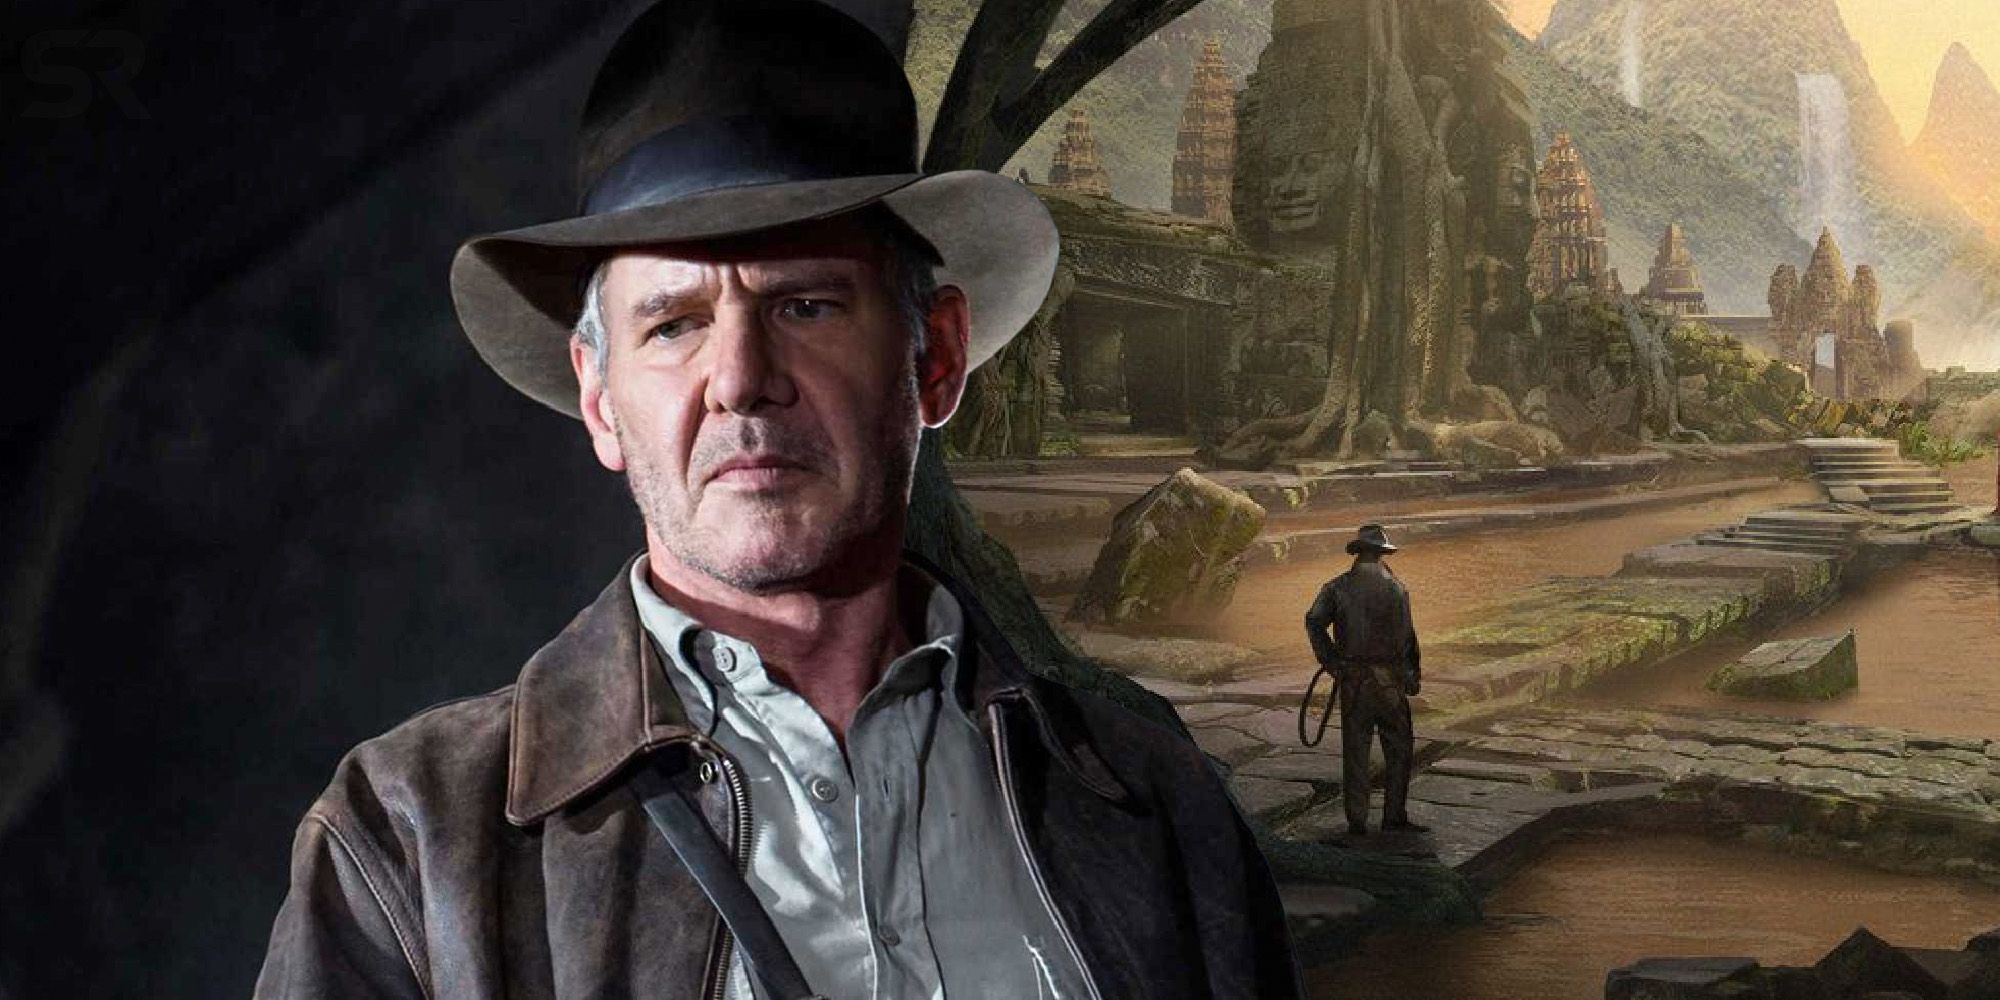 Every Unmade Indiana Jones Movie (And Why They Didn't Happen)